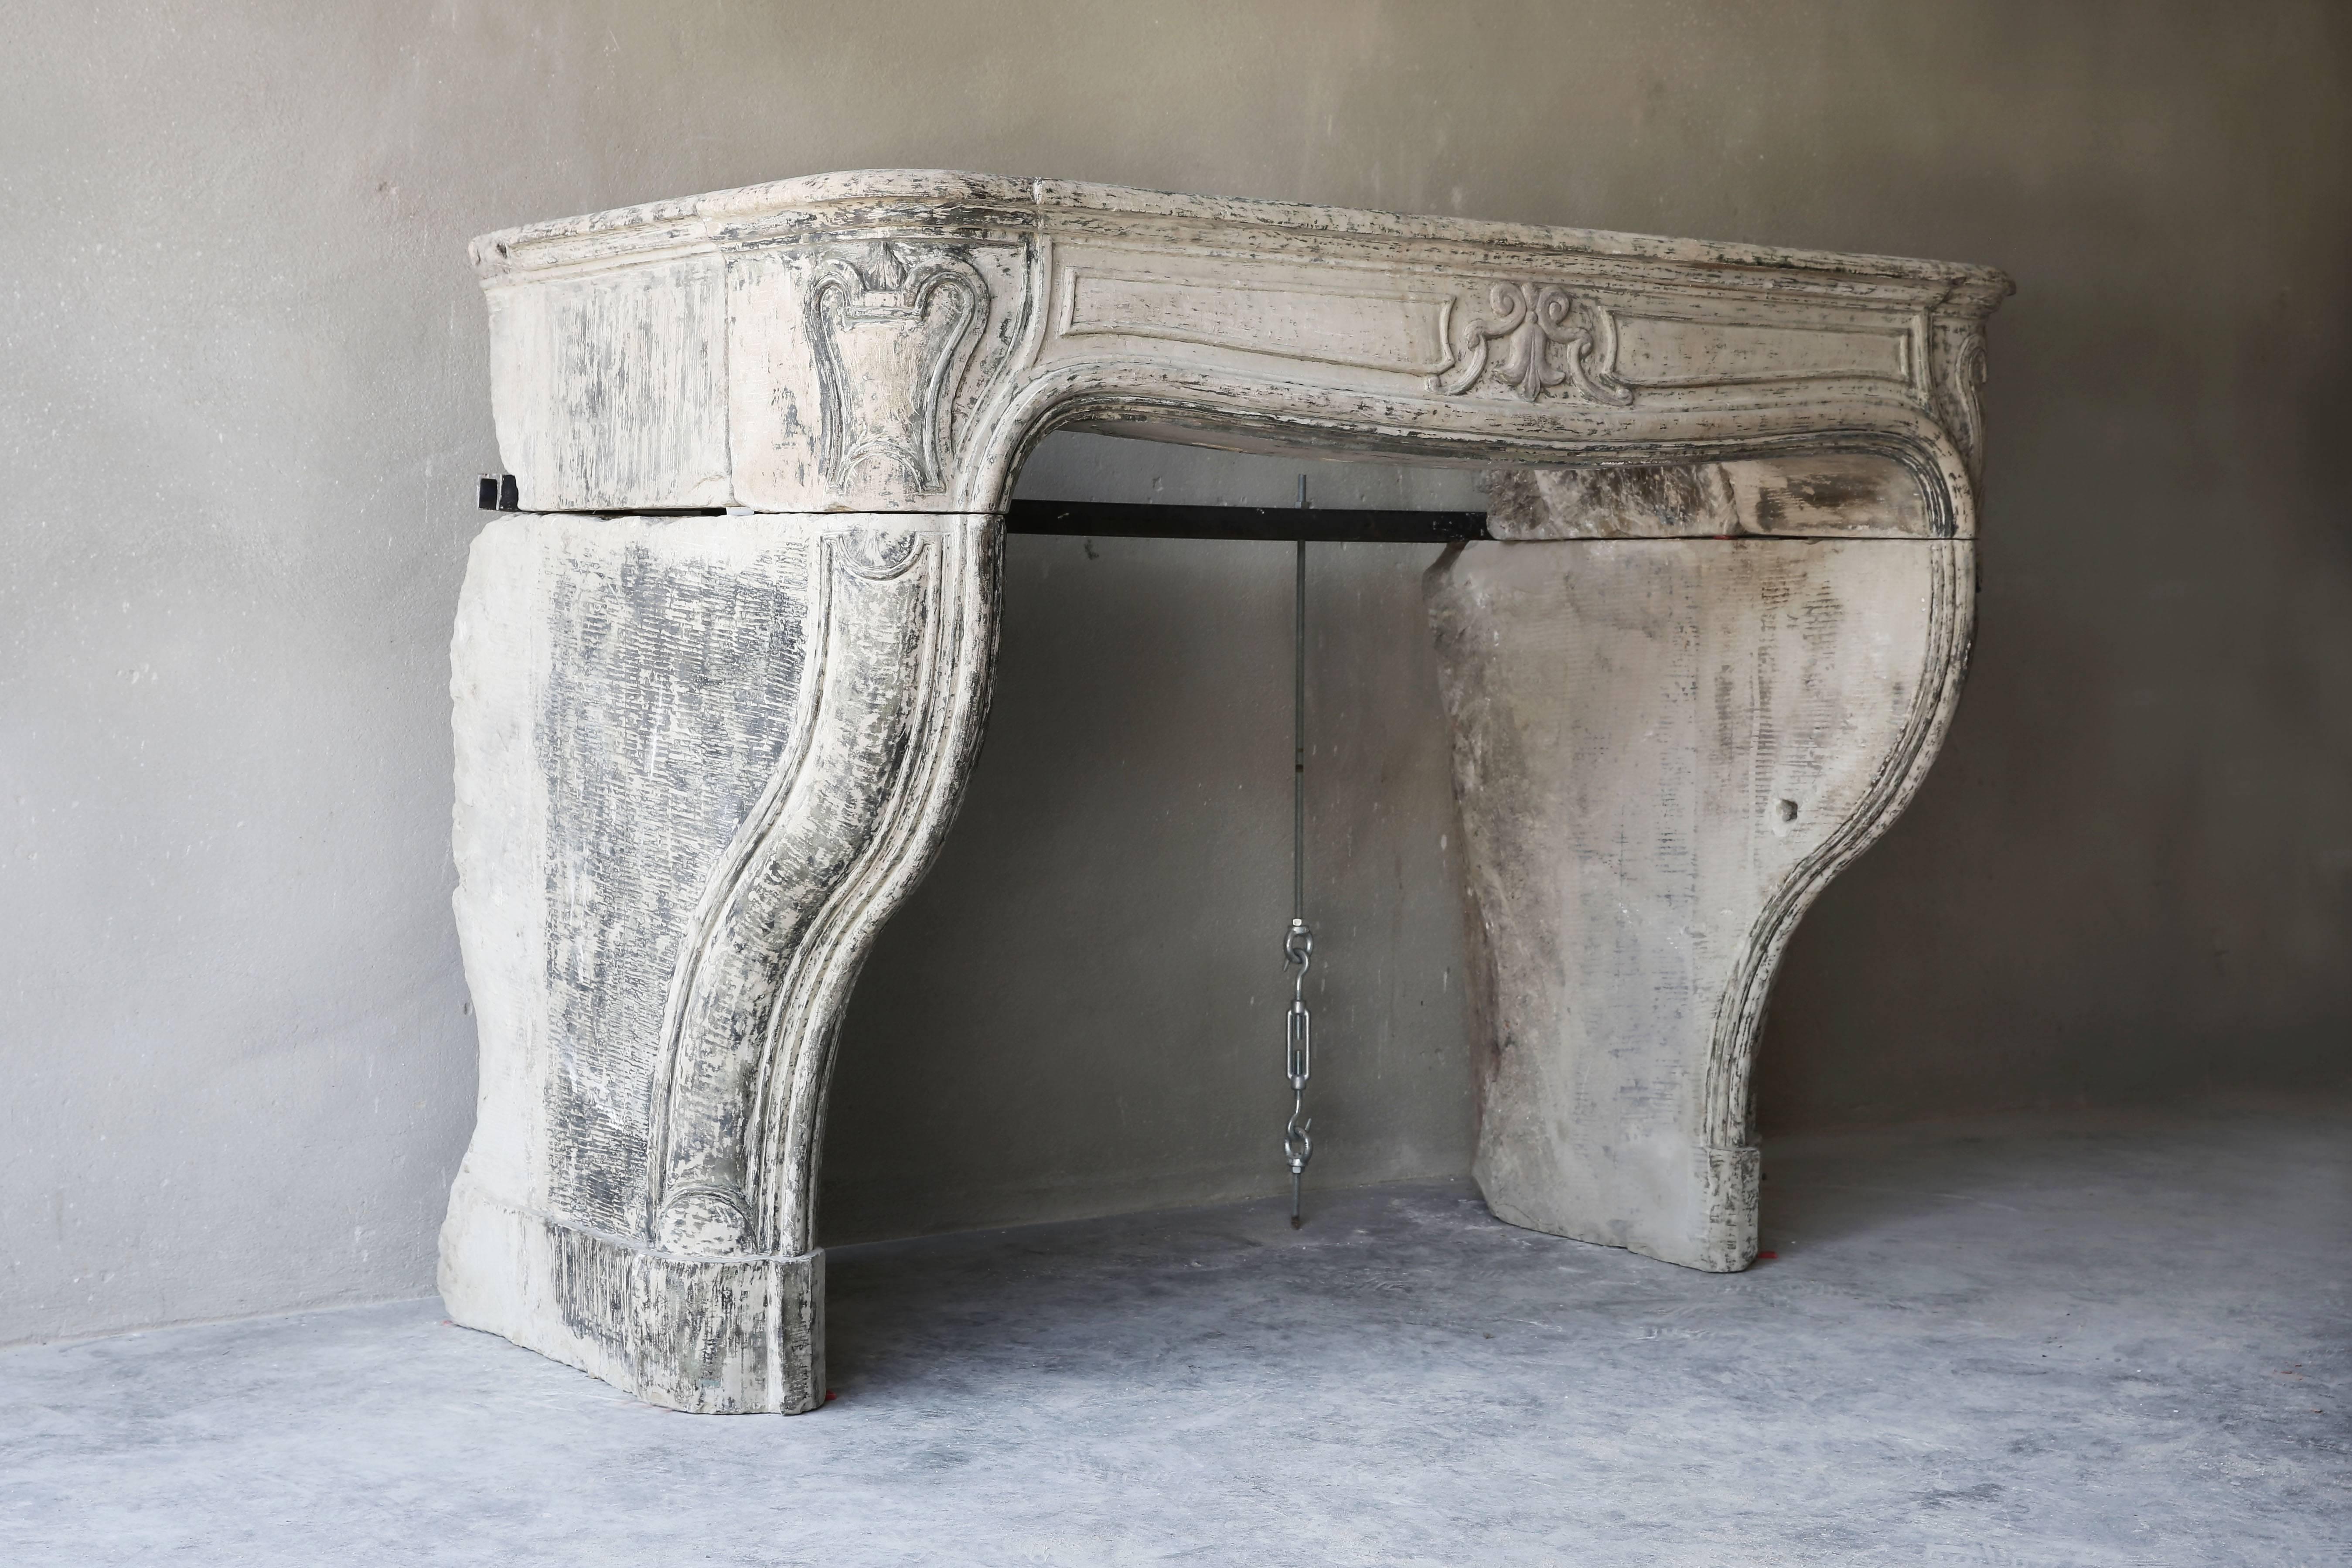 Very unique antique limestone fireplace with nice ornaments in the front section running on the legs. This particular fireplace fits into many interiors. The fireplace dates from the time of Louis XIV and the round shapes and patina gives the